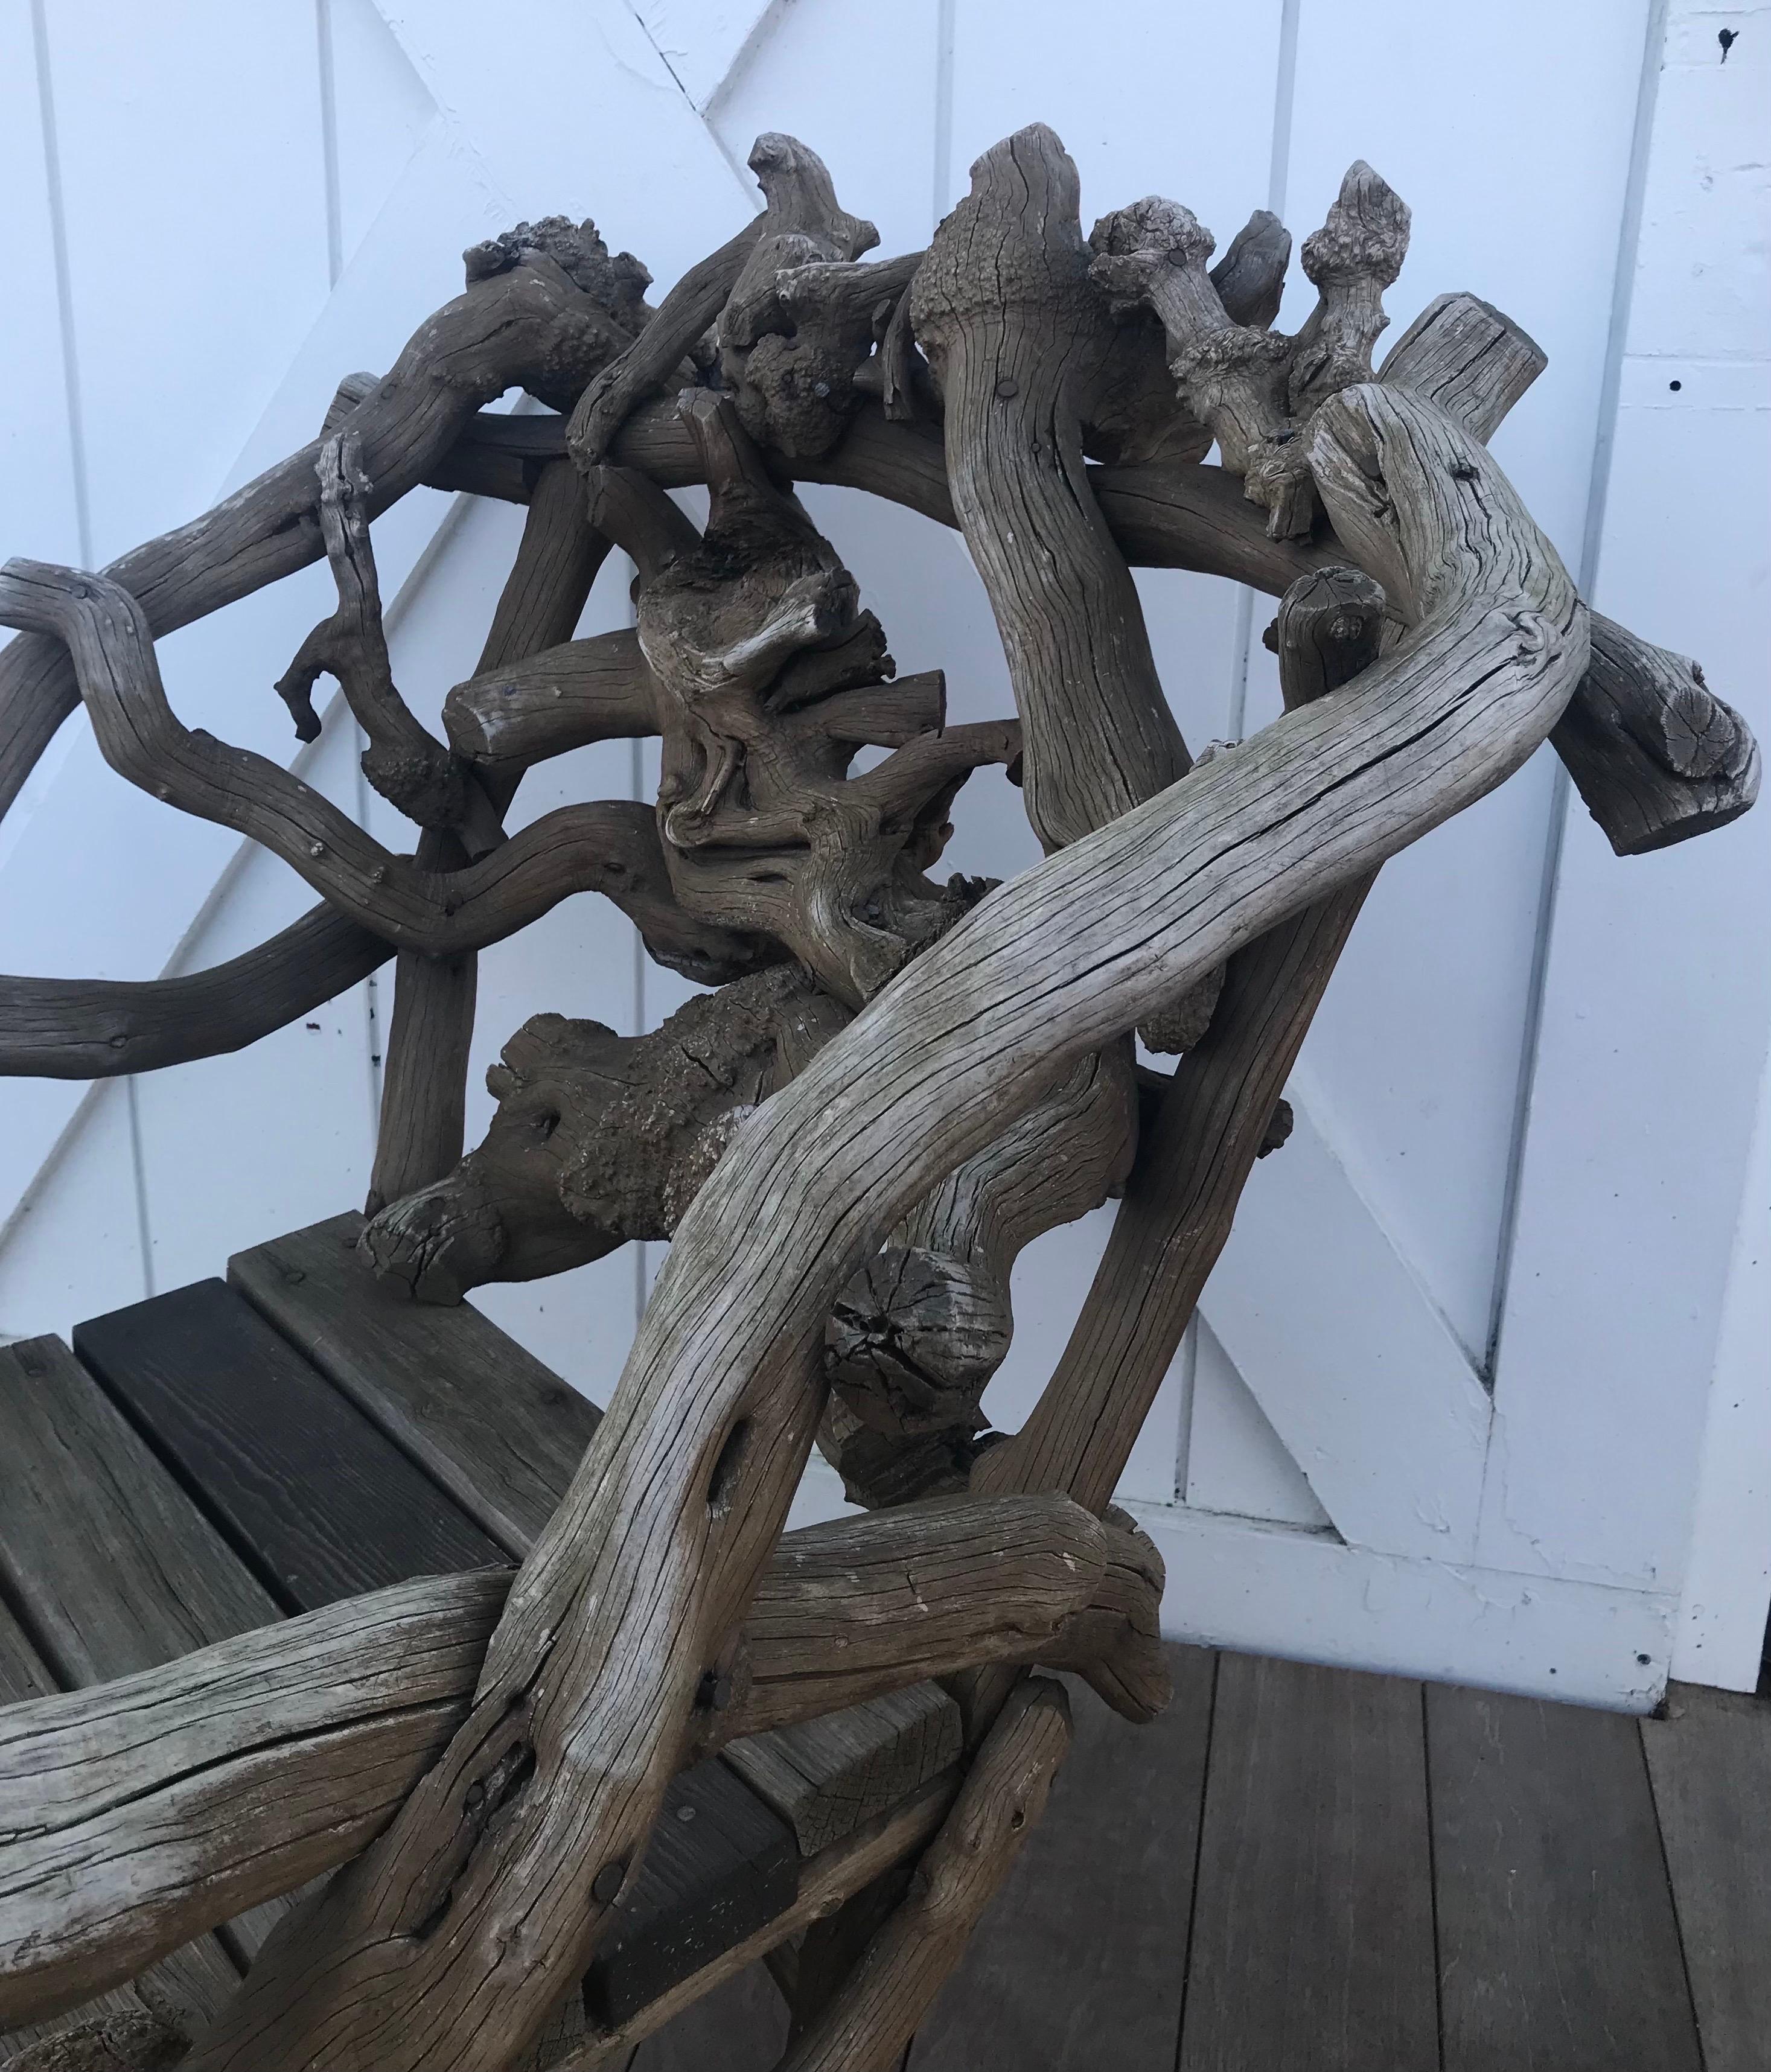 European (France) root chair fabricated of rhododendron vines. 
Very interesting look can be indoors or out. Looks great with a seat pad or interesting fur.